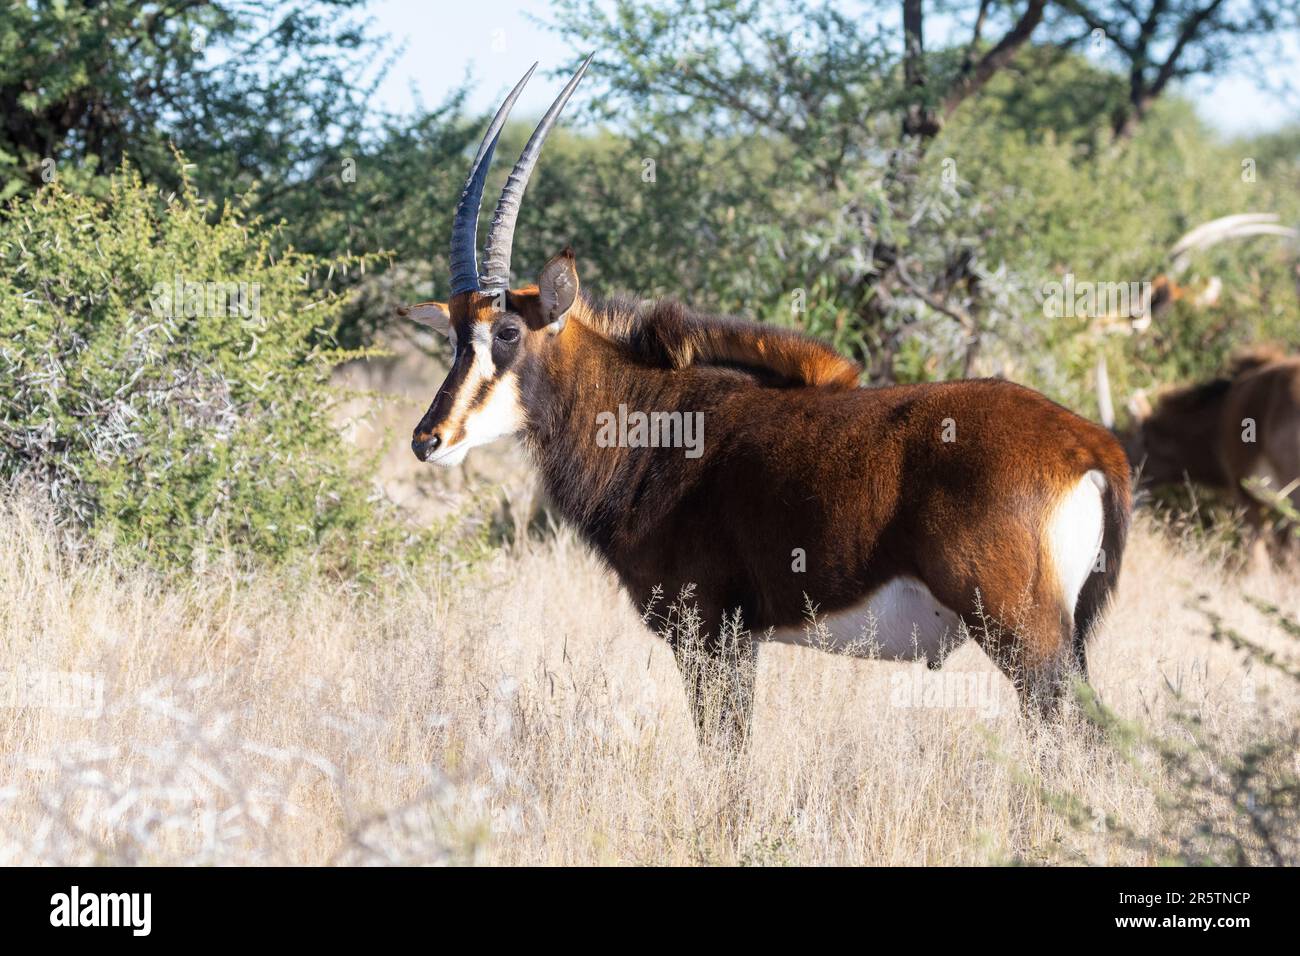 Sable Antelope (Hippotragus niger) in wooded savanna, Mokala National Park, South Africa Stock Photo